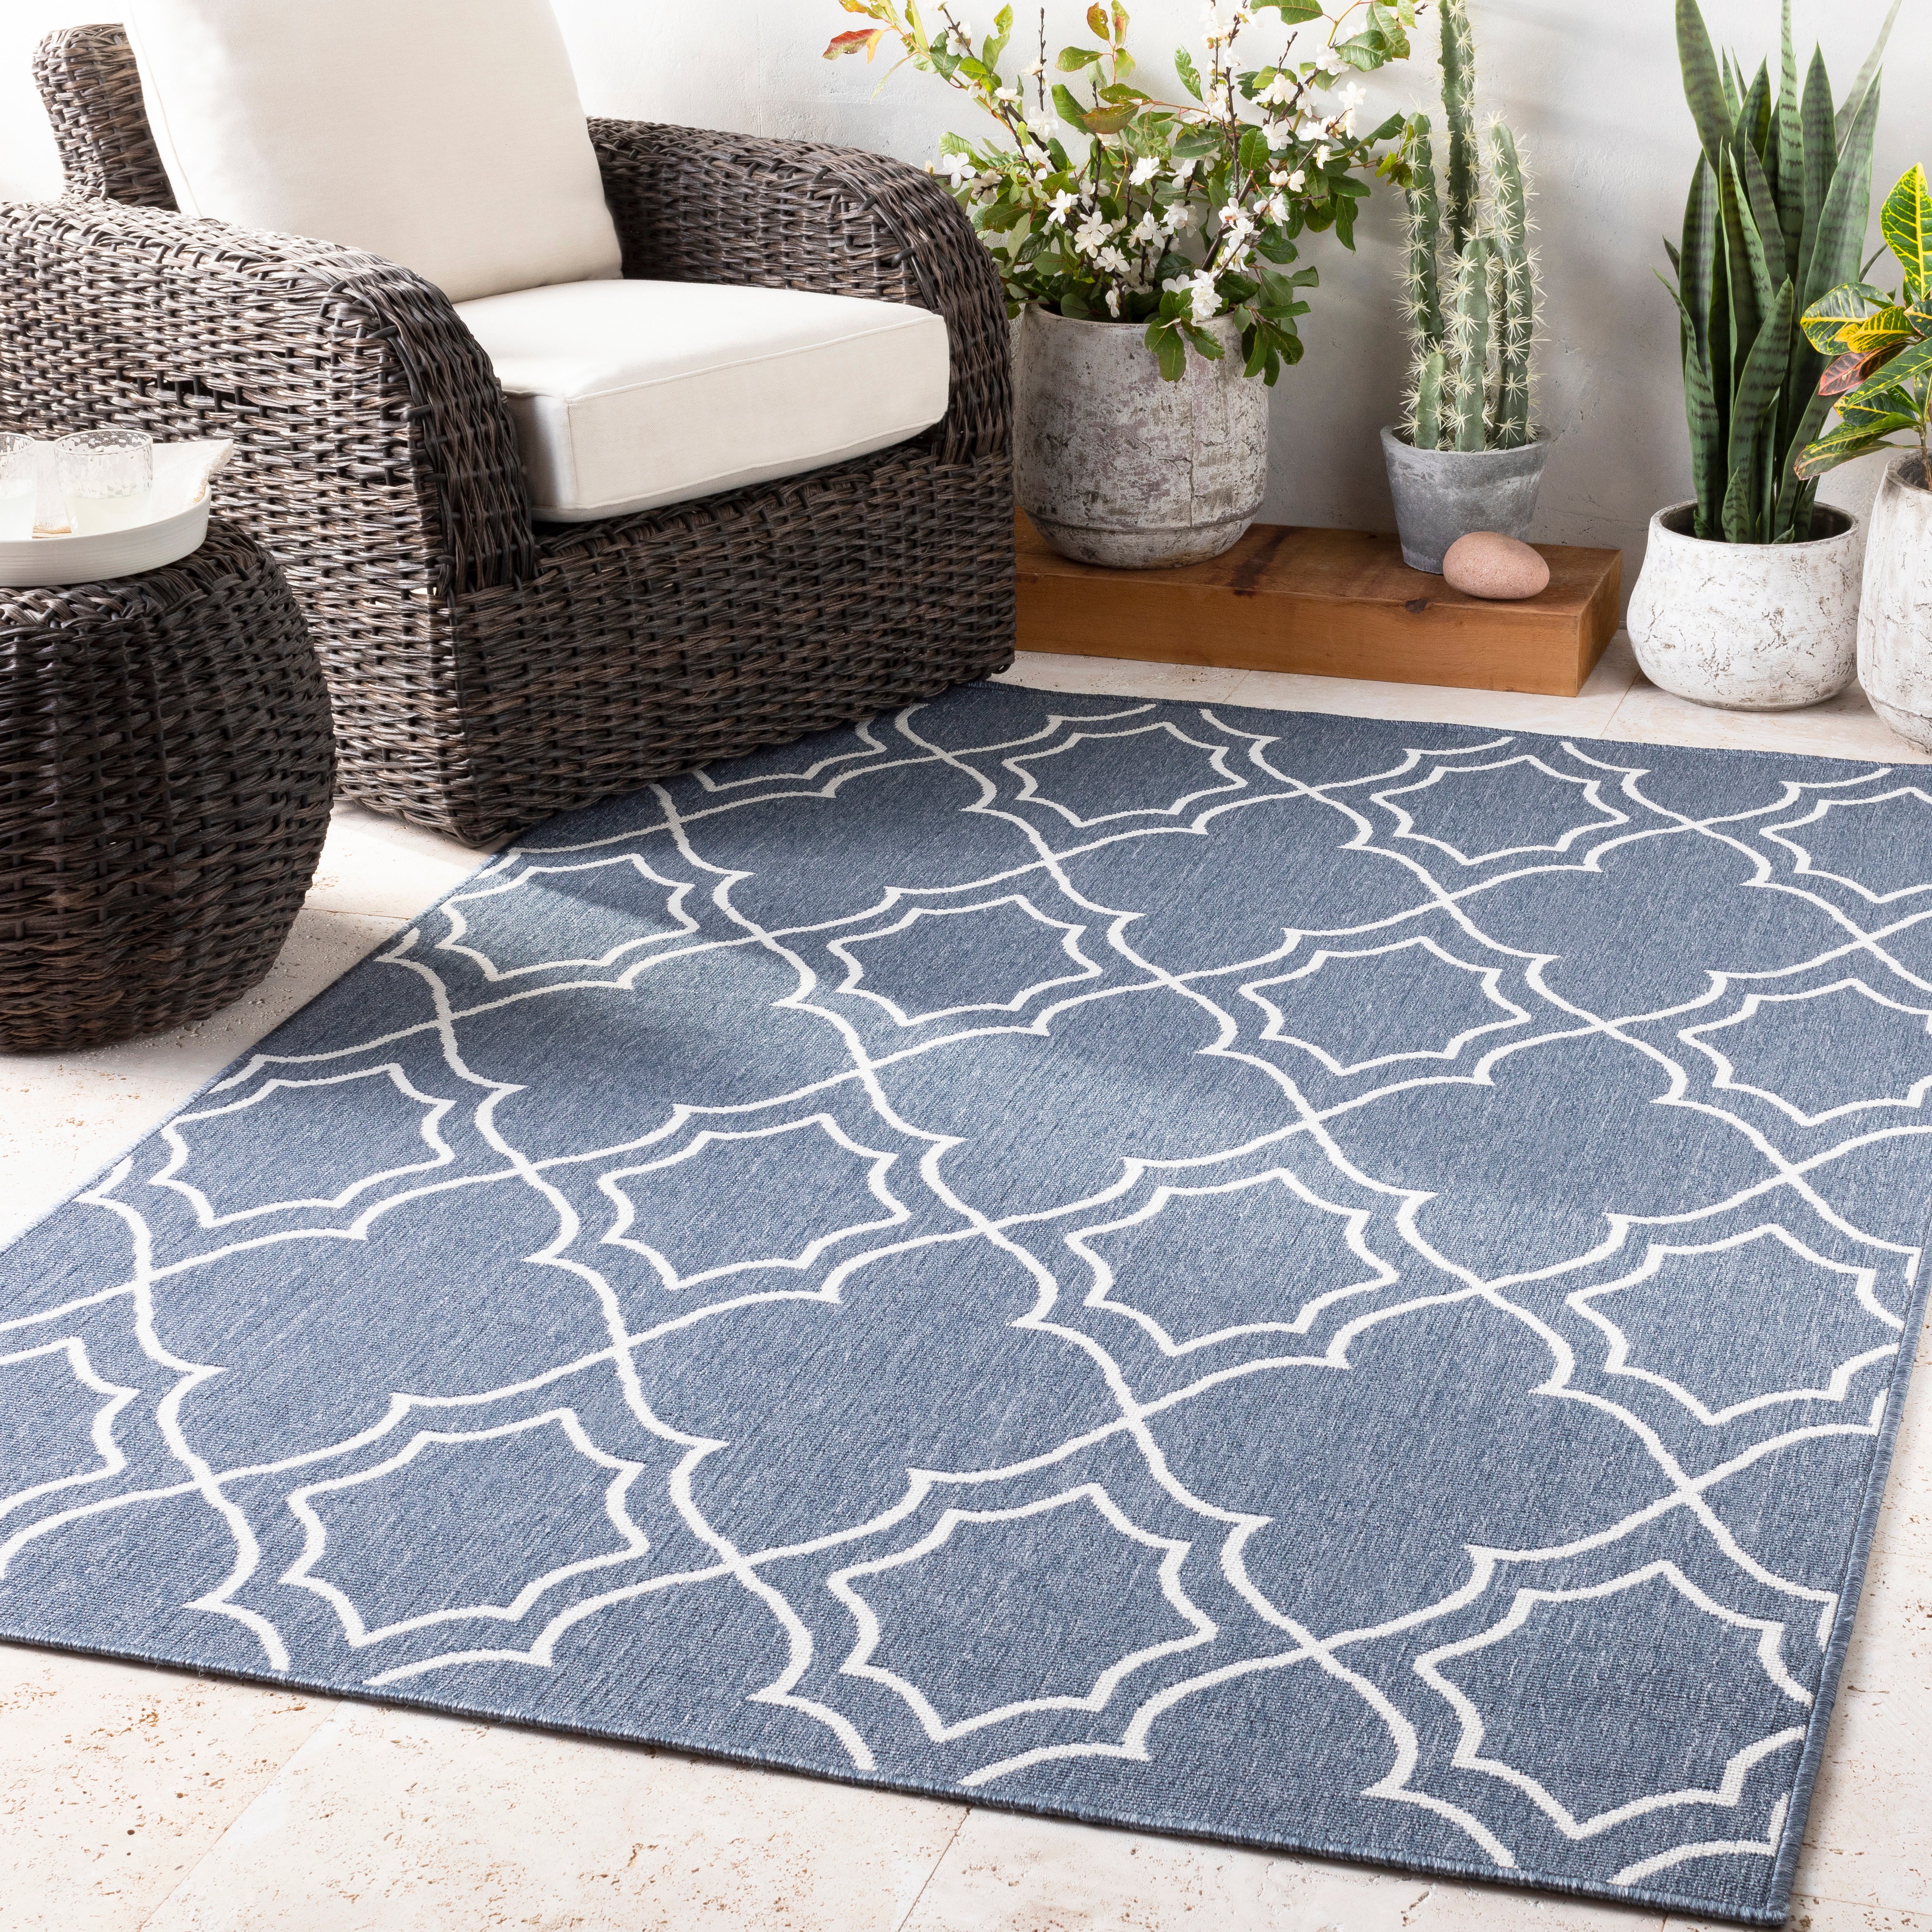 Square Rugs on sale now at The Rug Store